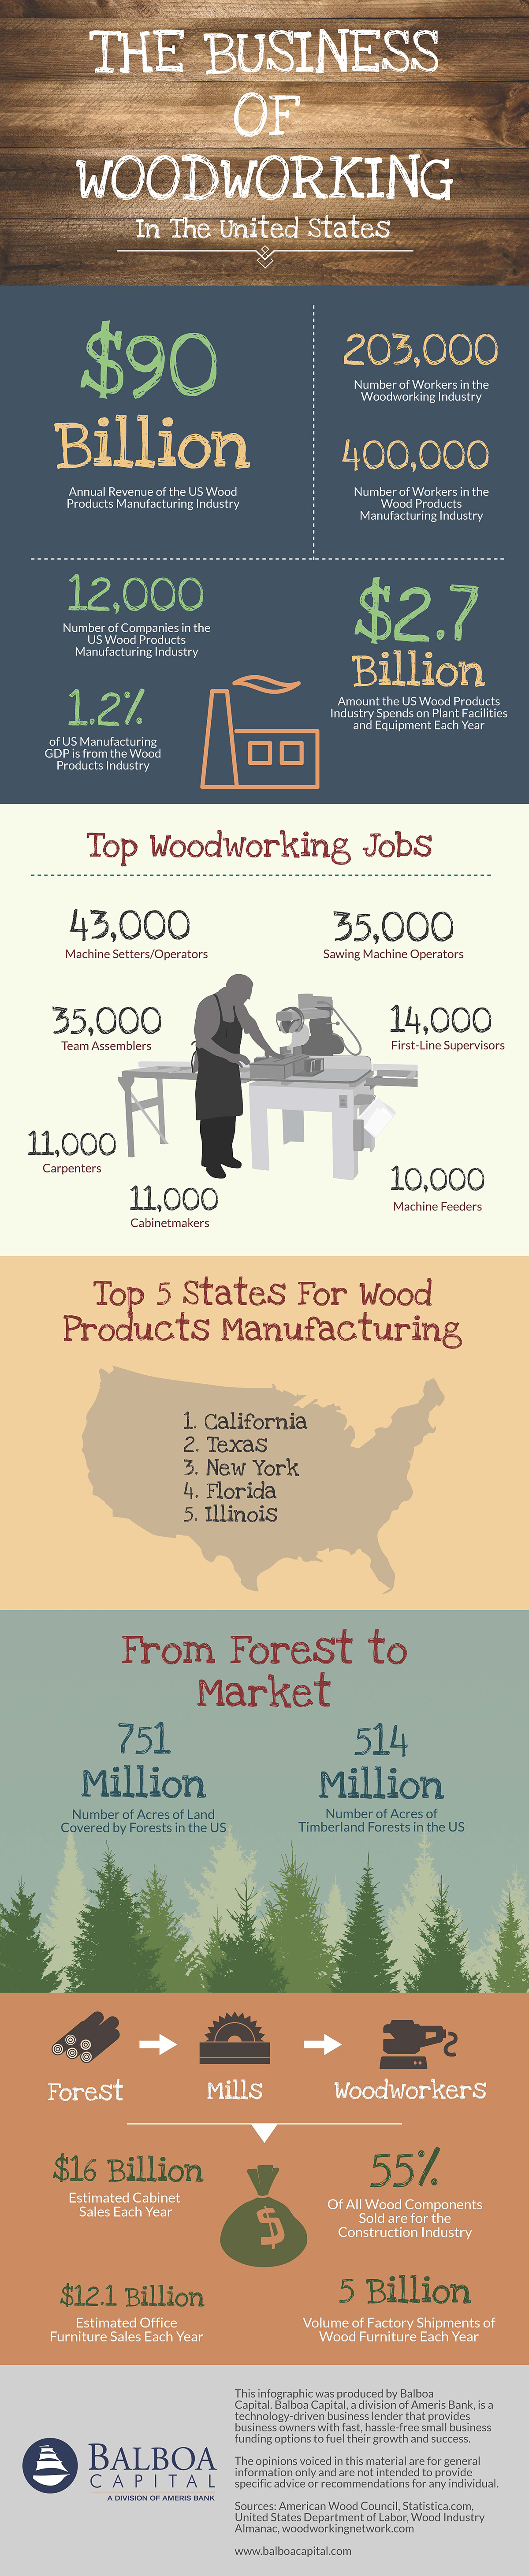 Woodworking Industry Infographic